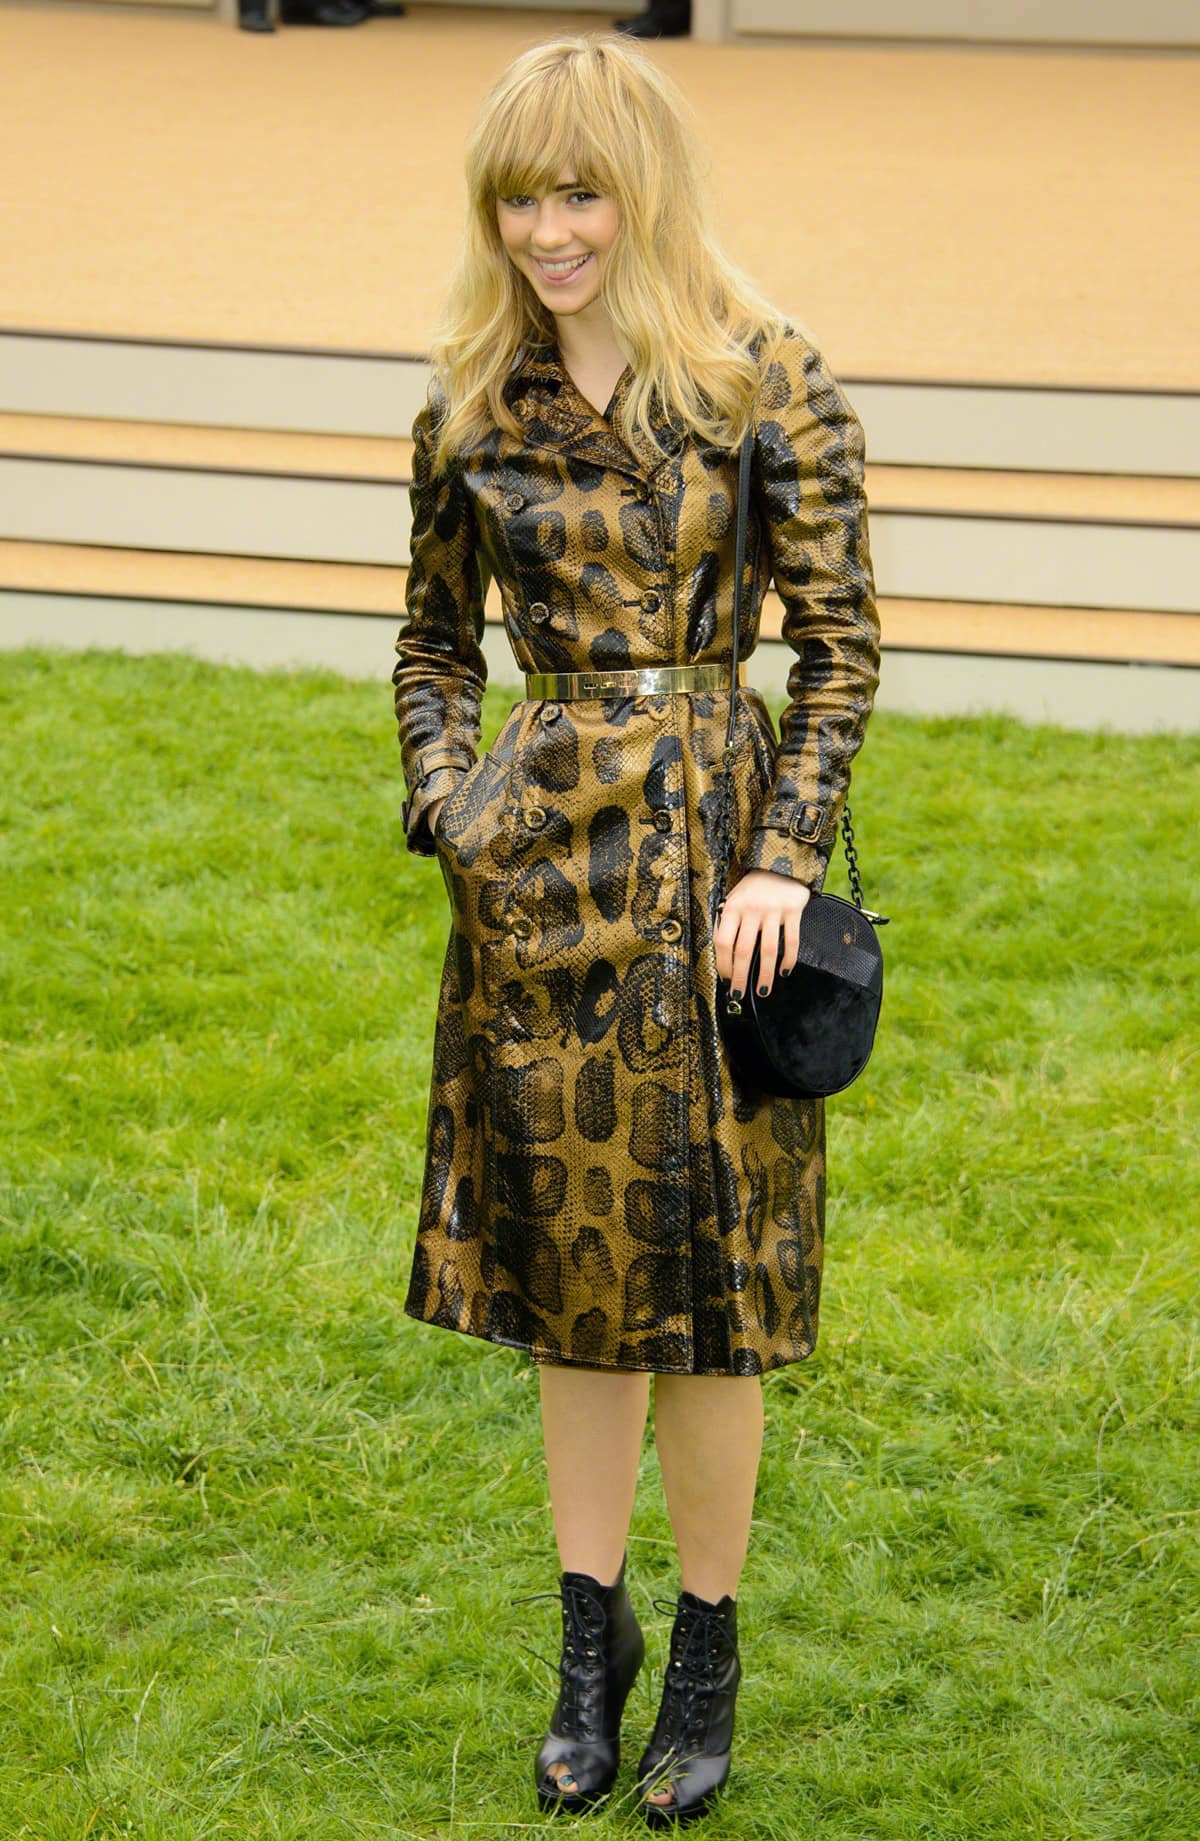 Suki Waterhouse epitomized glamour at the Burberry Prorsum SS14 show, where she sported a bronze and black snakeskin trench coat, stylishly cinched at the waist with a metallic belt